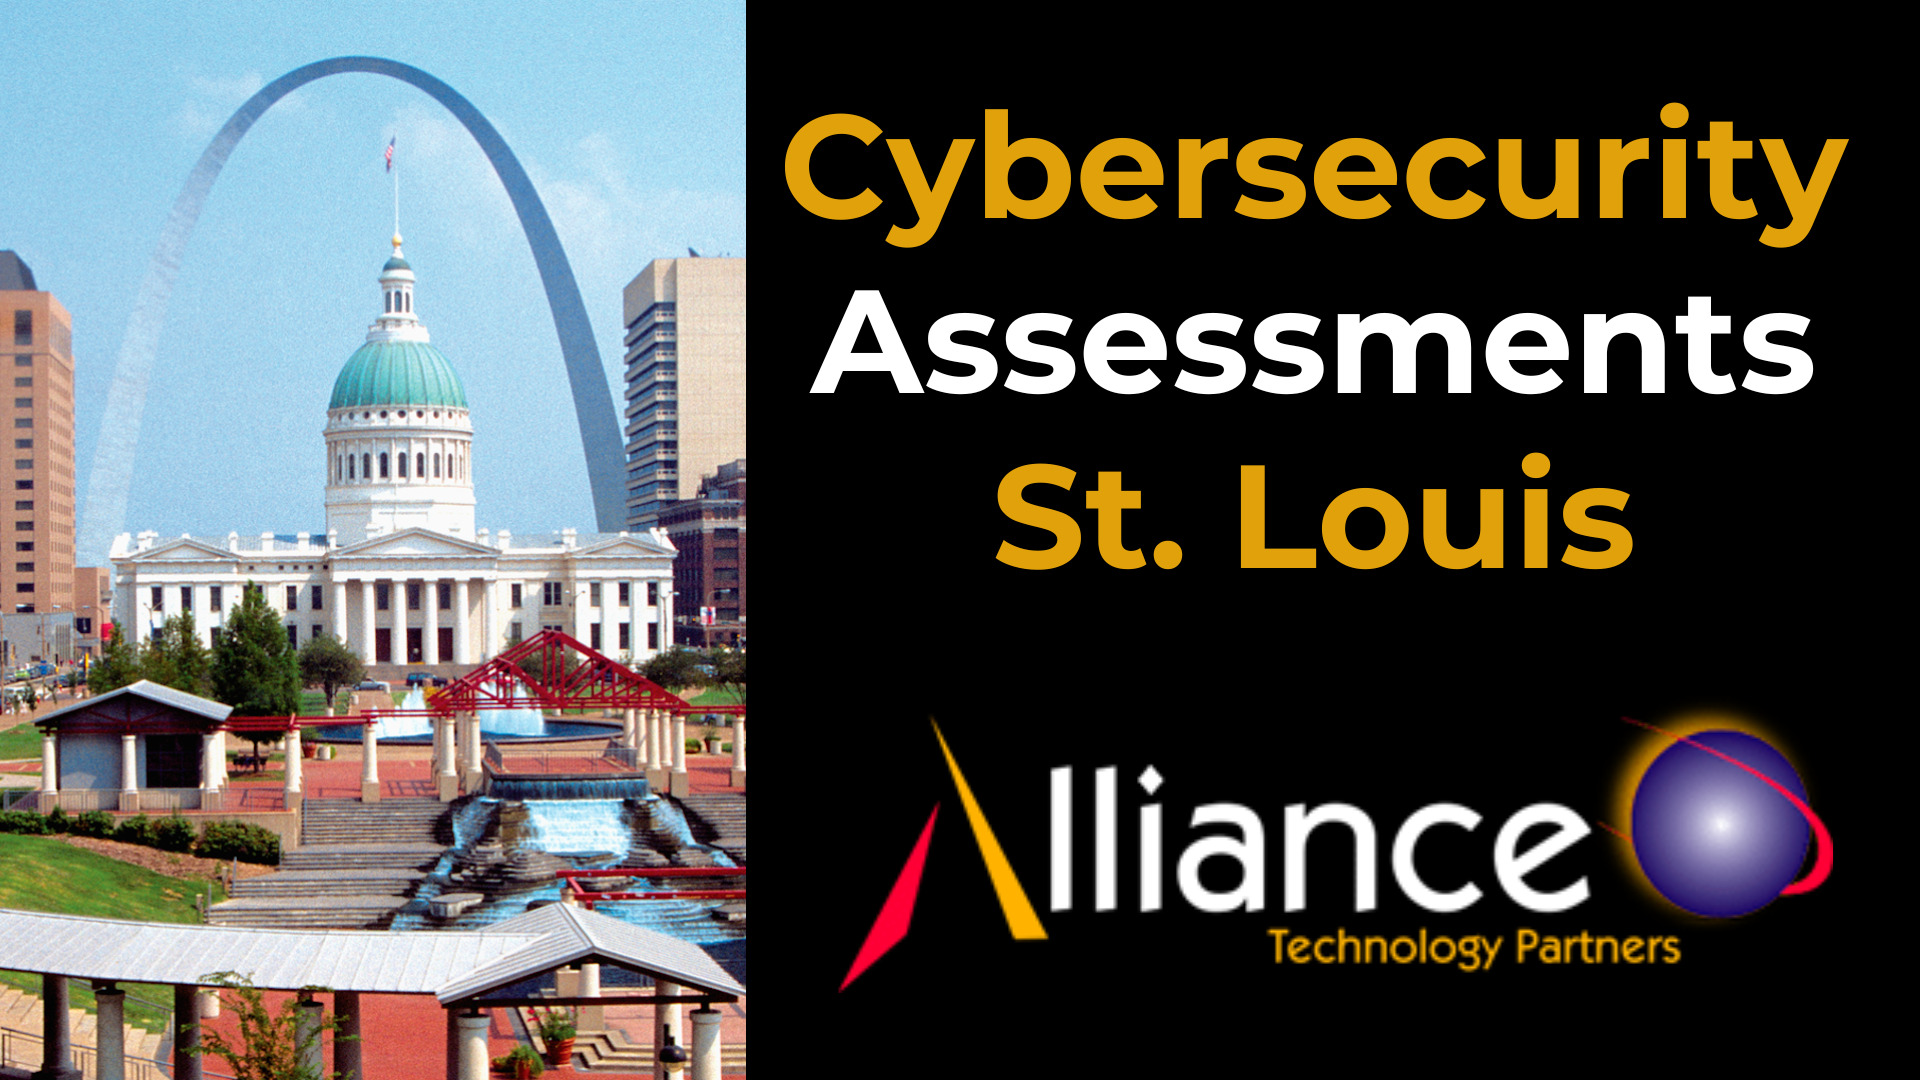 Who Can You Call For A Free Cybersecurity Audit In St. Louis?